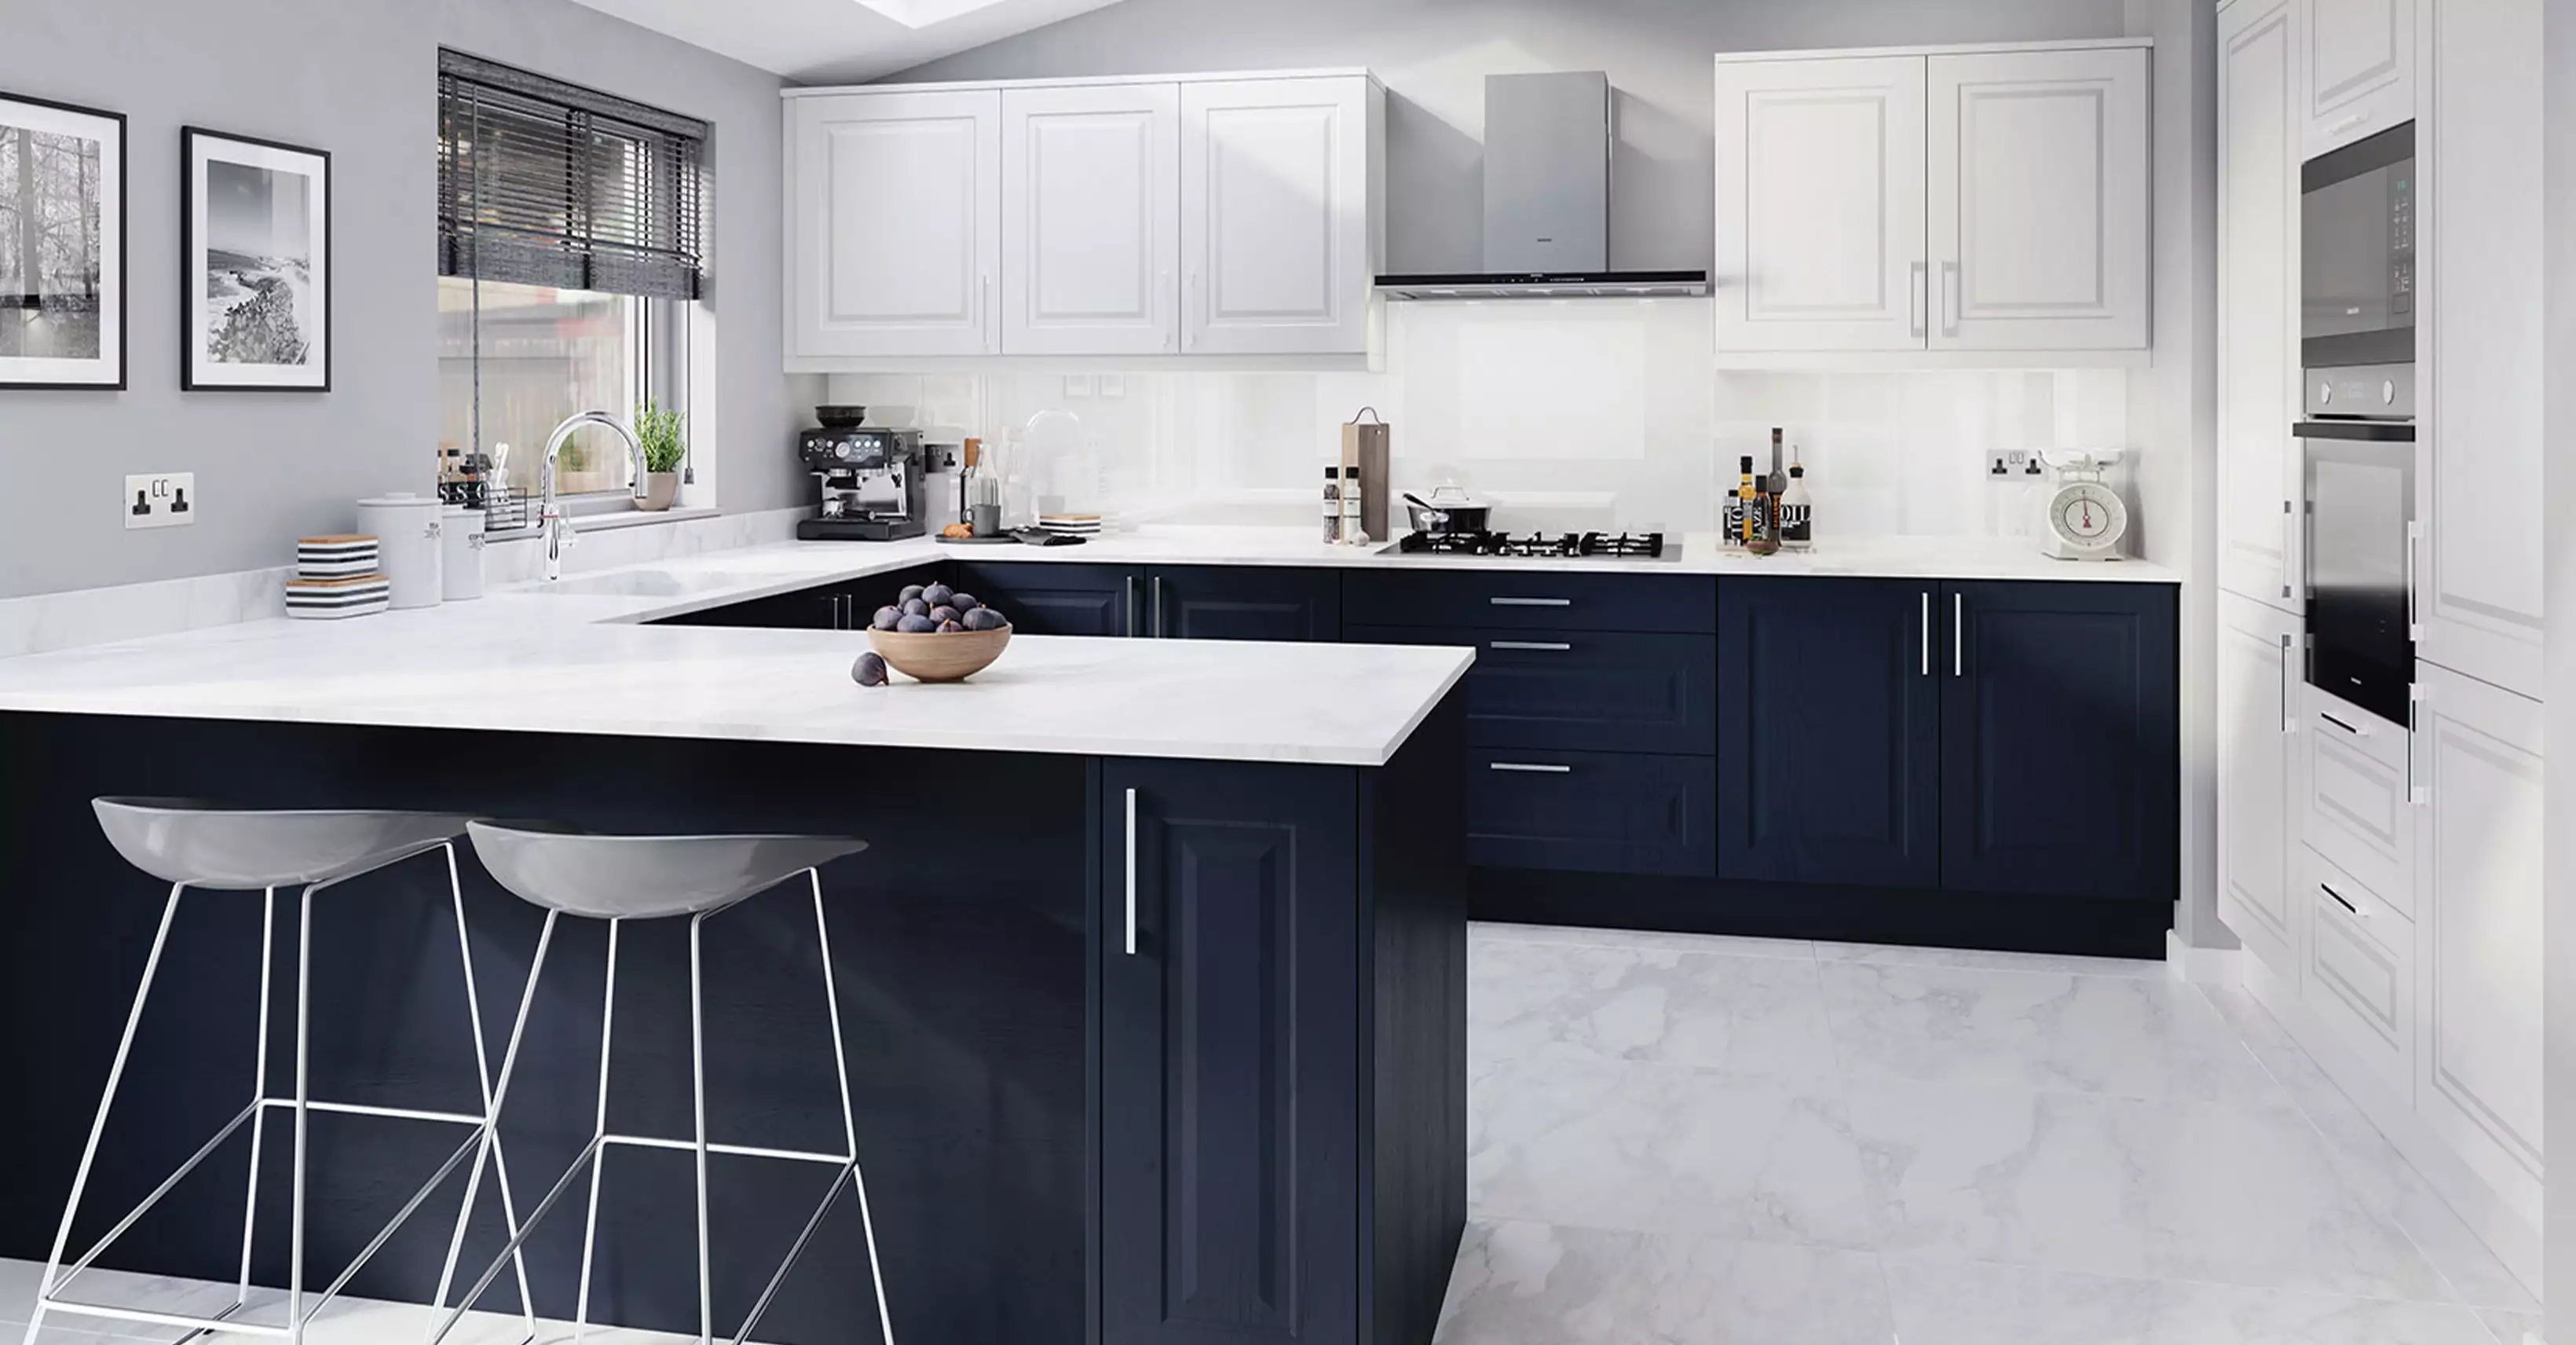 Portree Kitchens Newcastle & North East